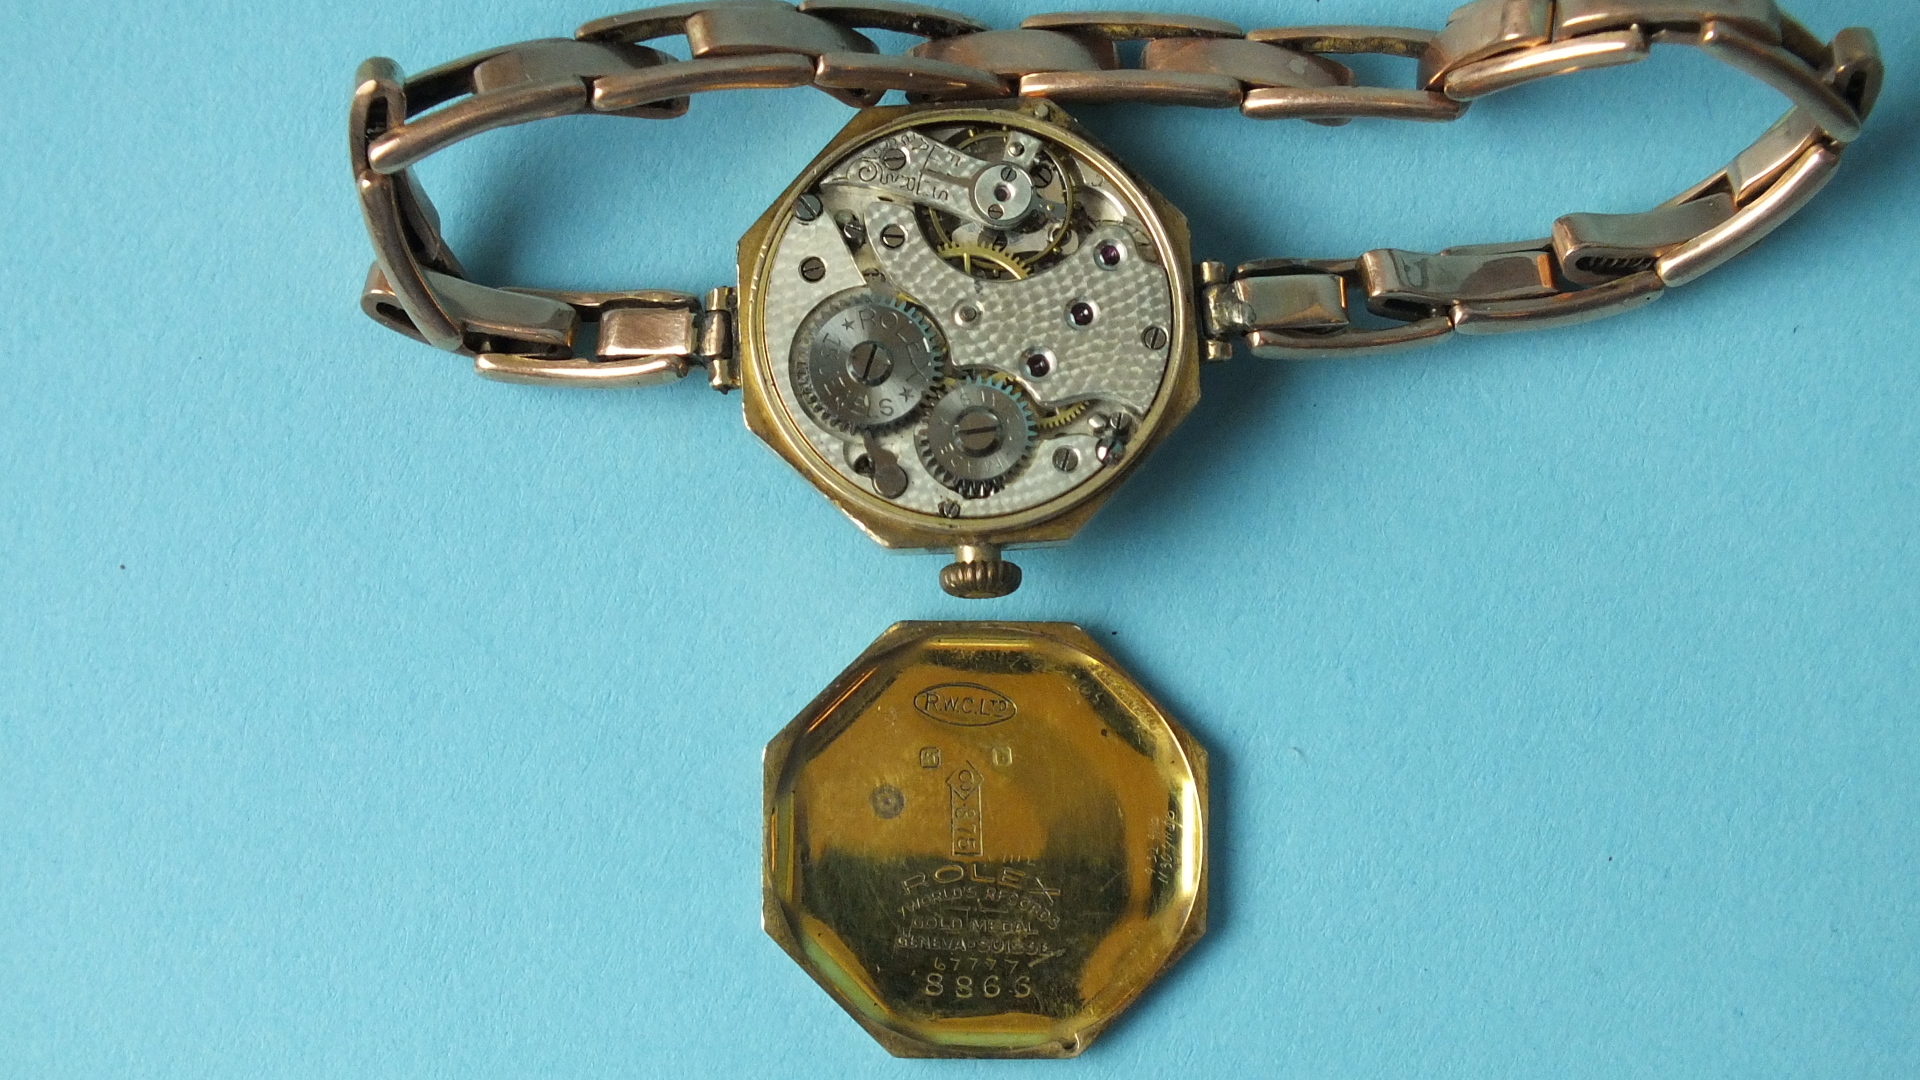 Rolex, a lady's 9ct gold octagonal-cased wrist watch, 1939, with 15-jewel movement, signed 'Rolex' - Image 4 of 5